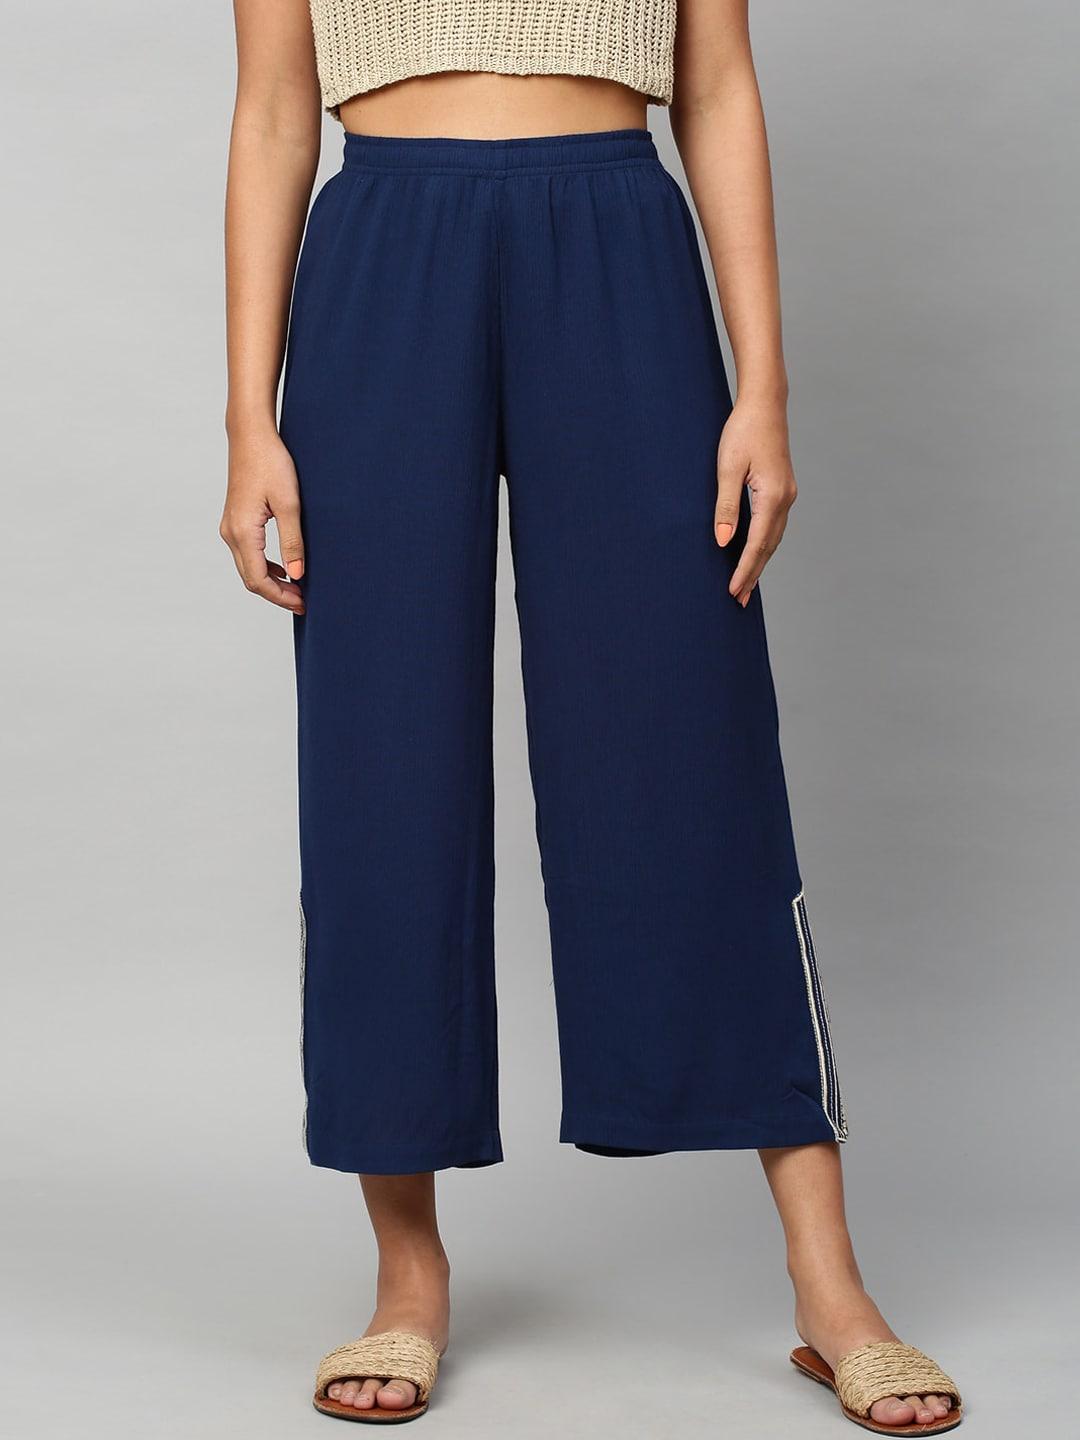 chemistry-women-navy-blue-regular-fit-cropped-culottes